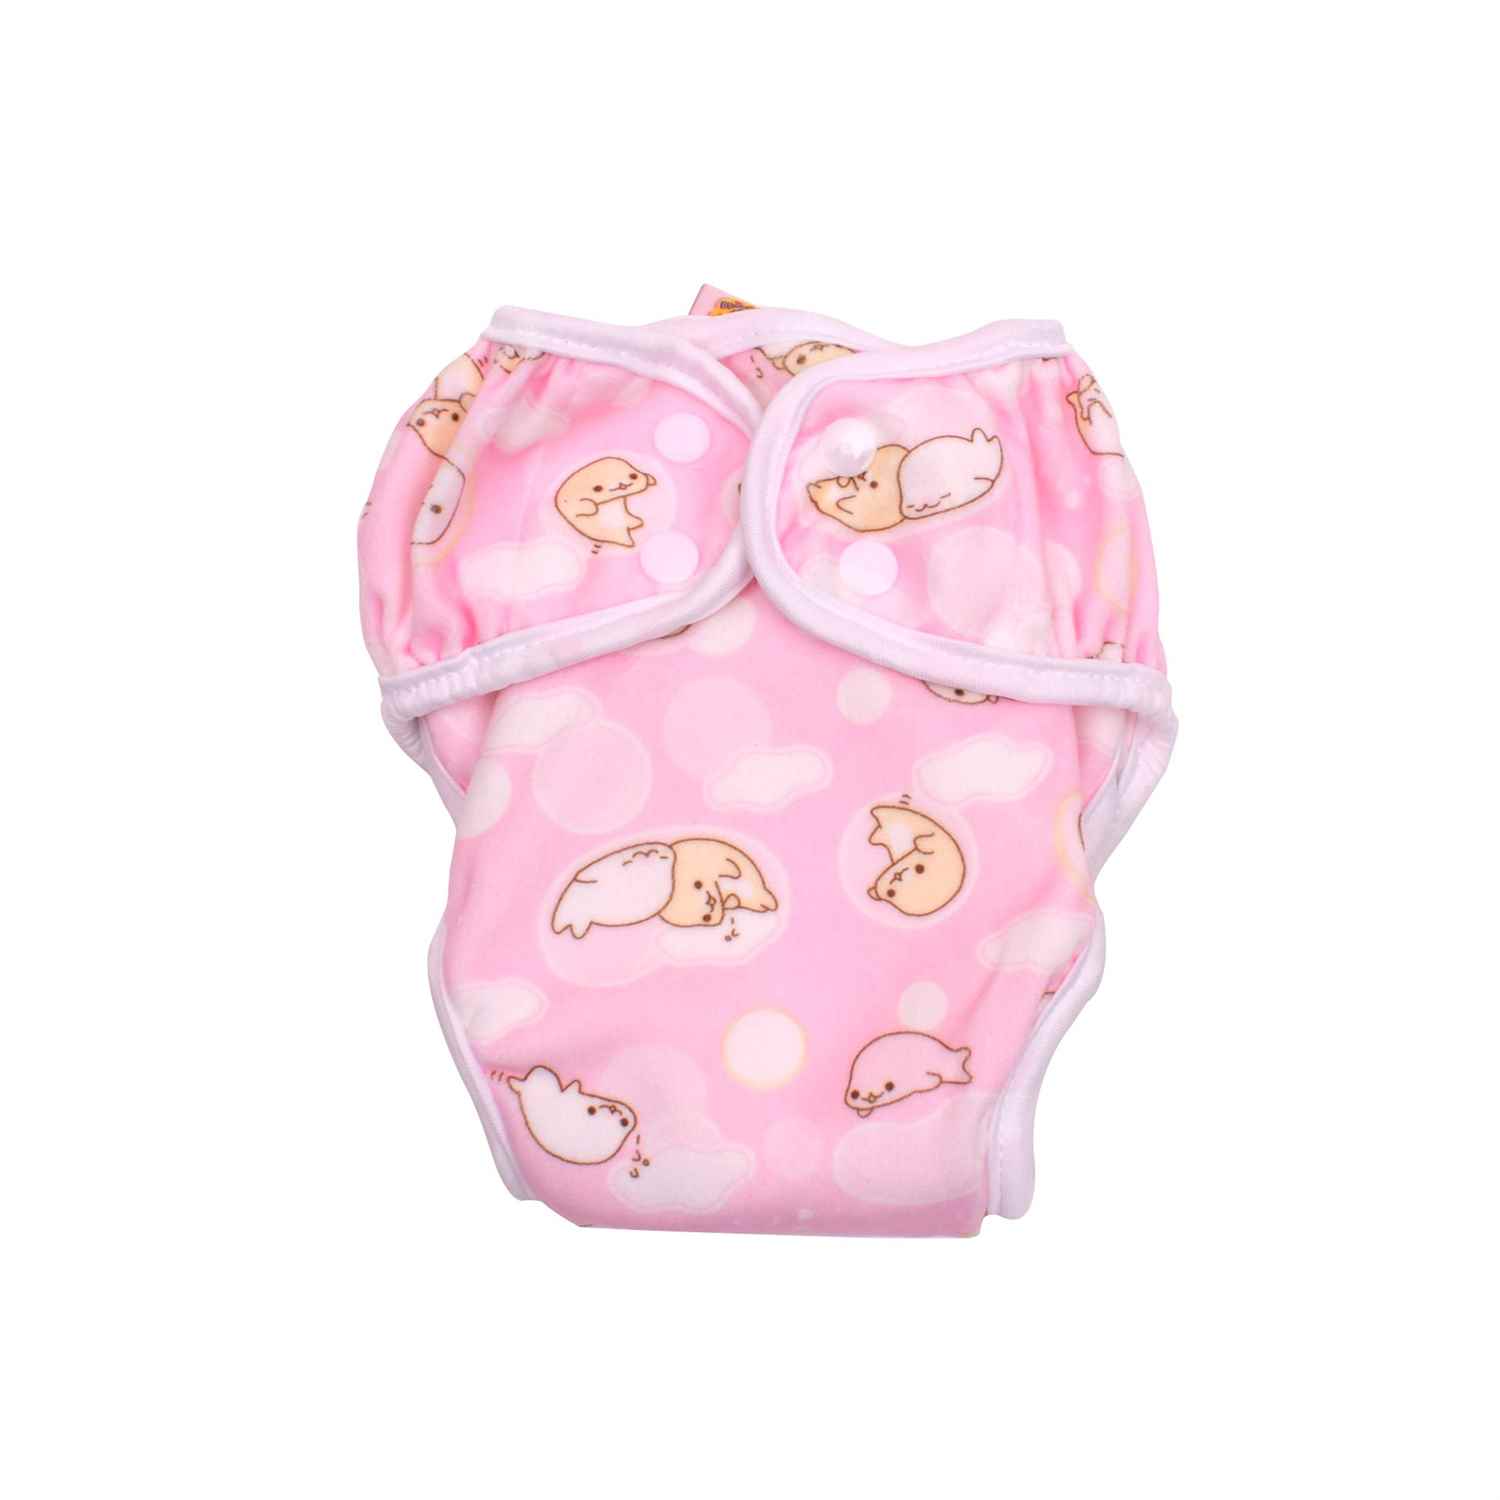 PAW PAW Baby Reusable Fabric Diaper with Pad, Size XL (10-14kg)-Pink